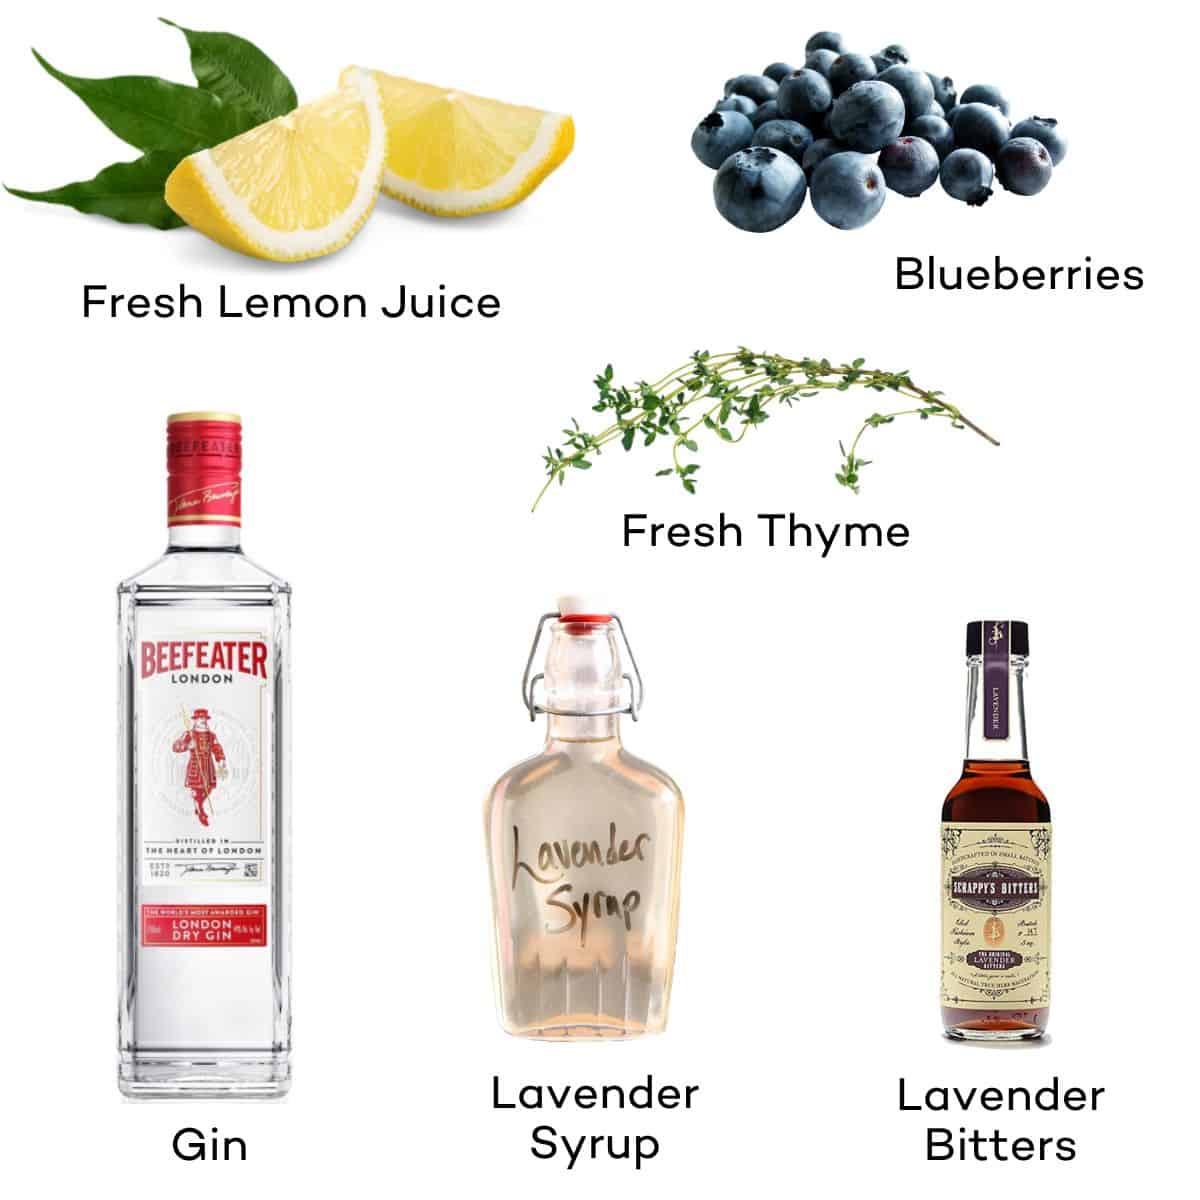 Ingredients for blueberry lavender gin cocktails.